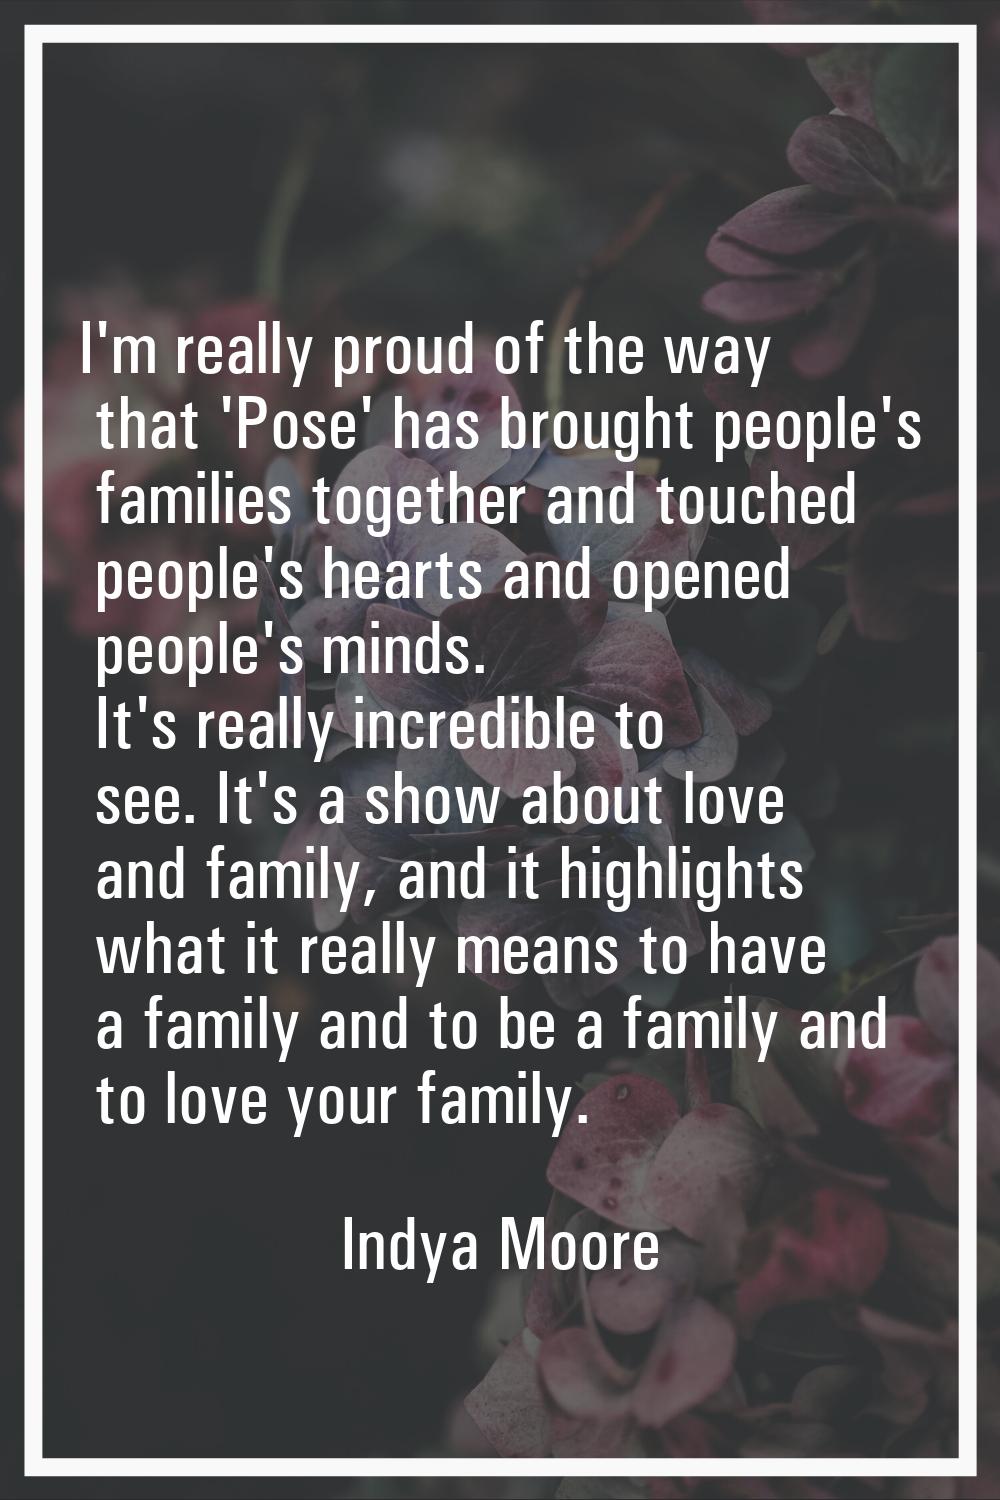 I'm really proud of the way that 'Pose' has brought people's families together and touched people's